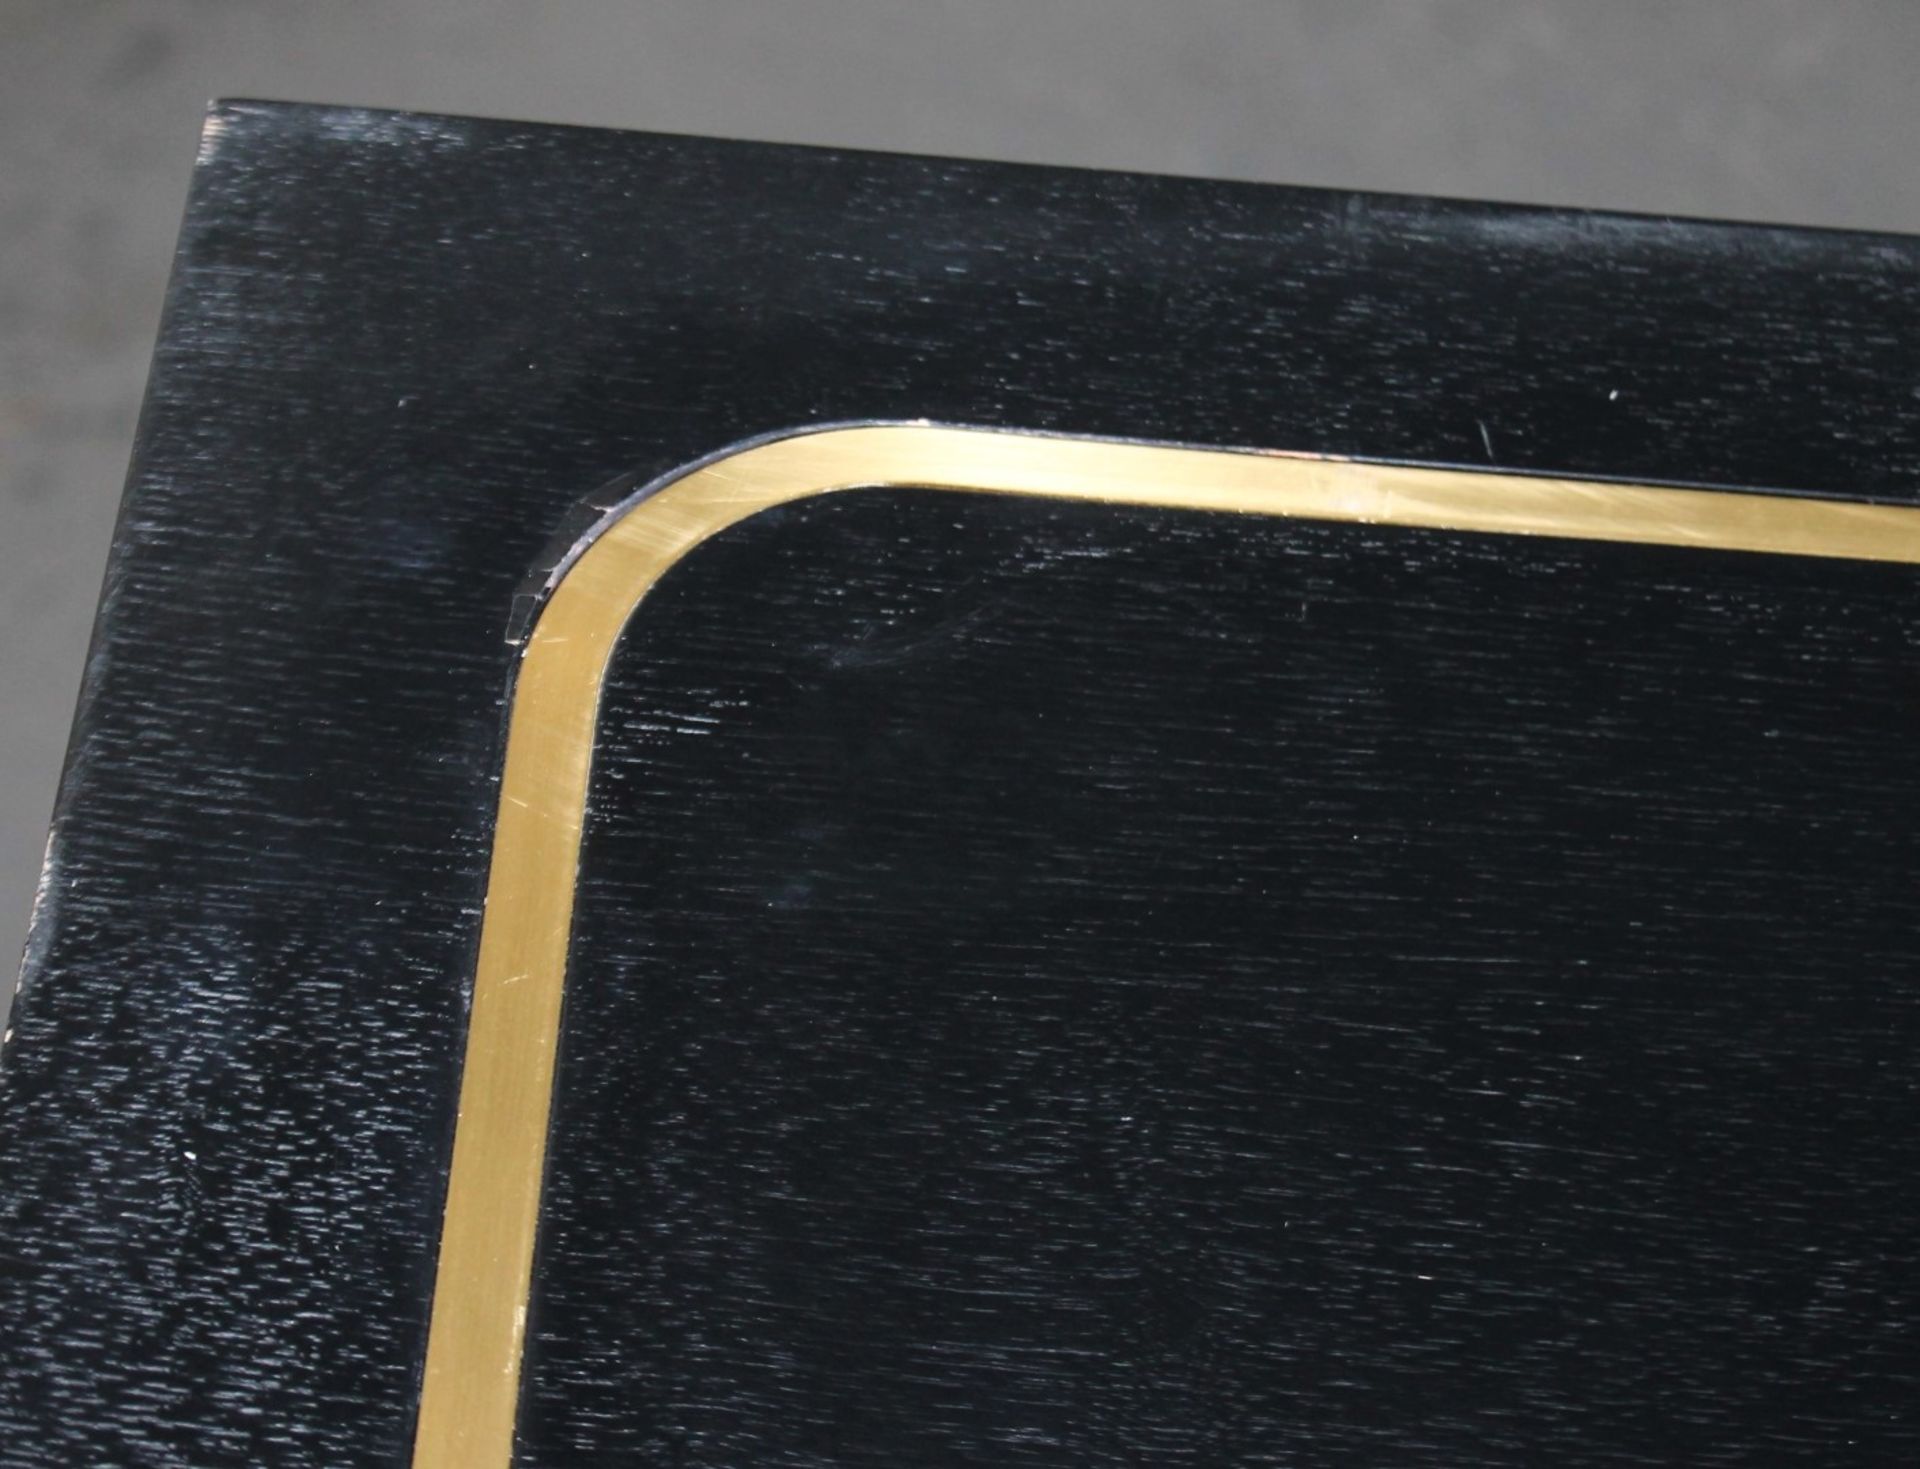 1 x Shanghai Tang Wooden Display Table In Black With Brass Inlay - Recently Removed From A World- - Image 2 of 7